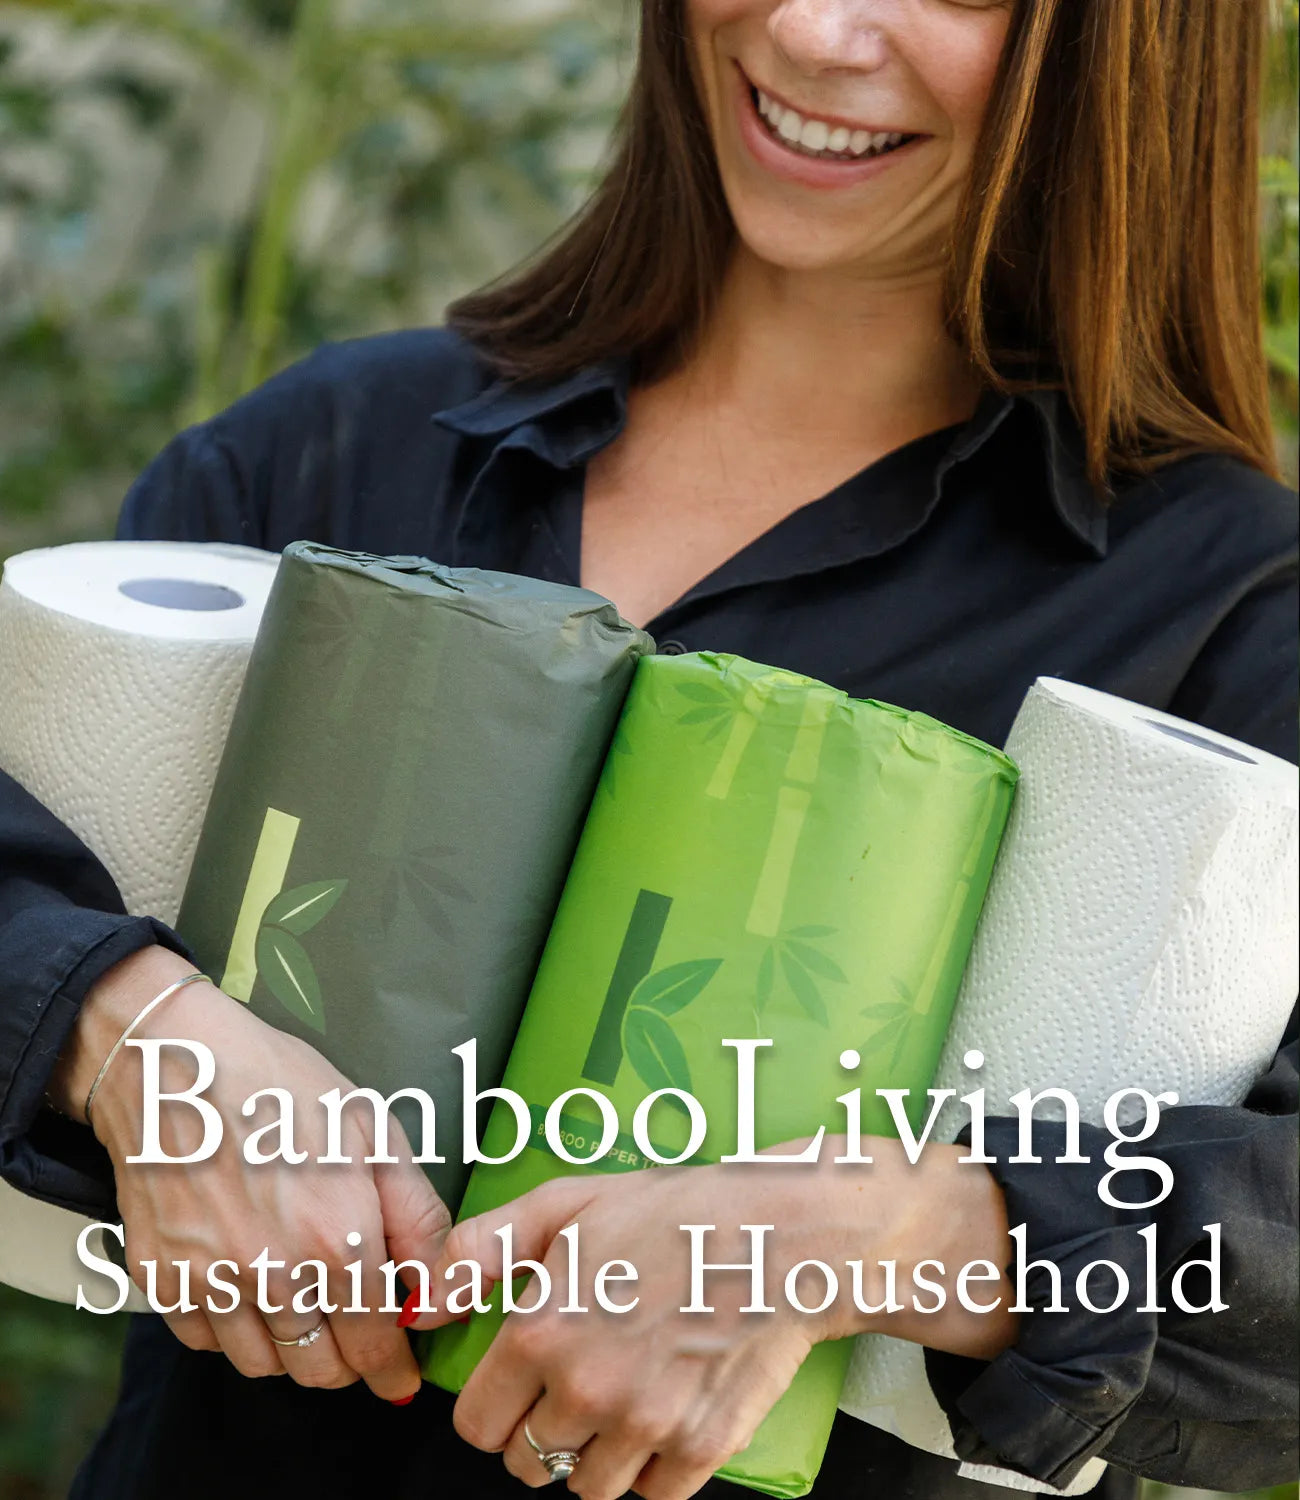 a woman holding eco-friendly bamboo paper towels from Seek Bamboo as a collection image